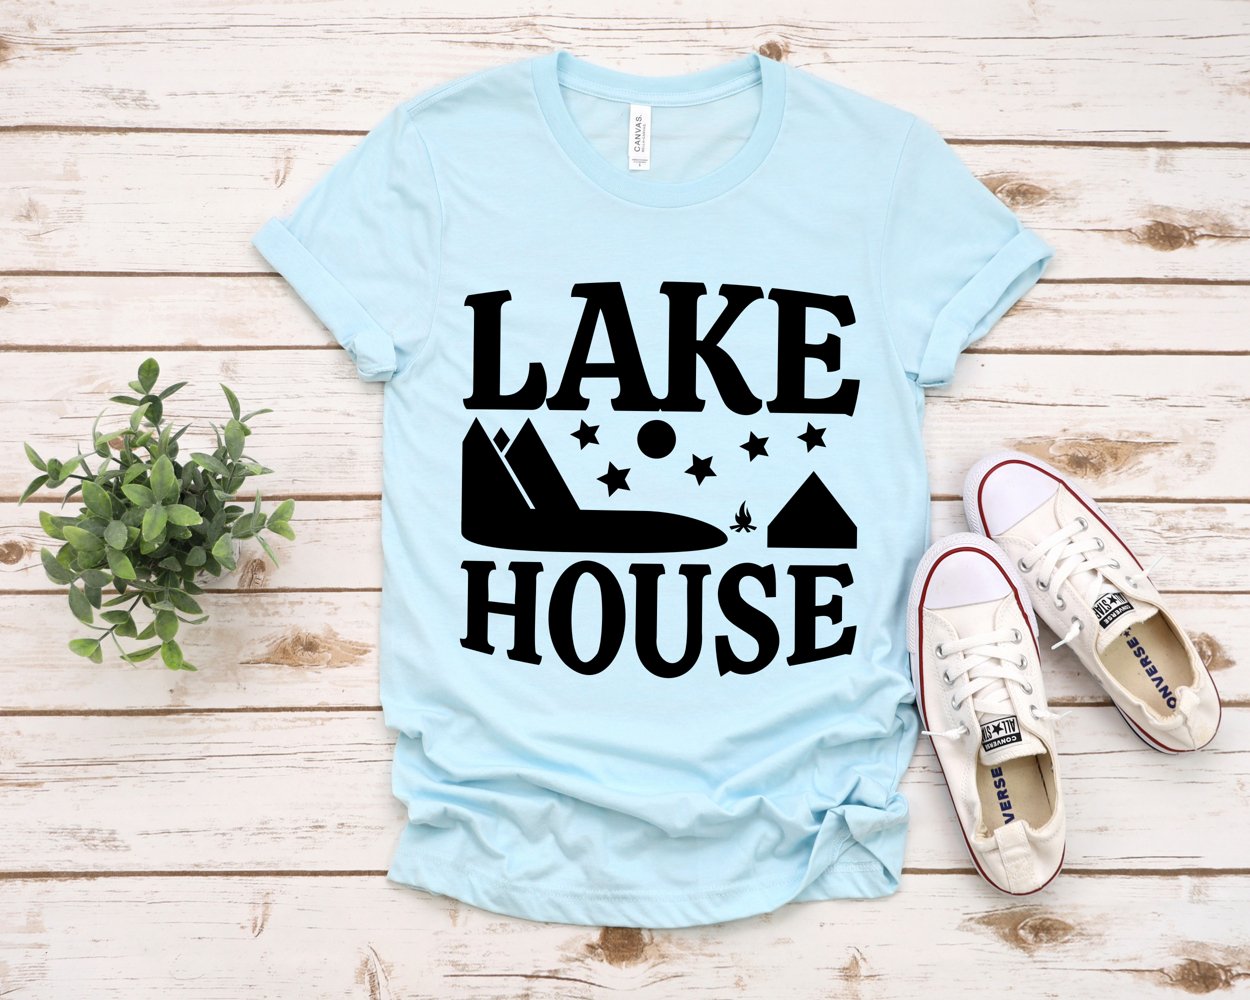 T-shirt image with house on the lake.